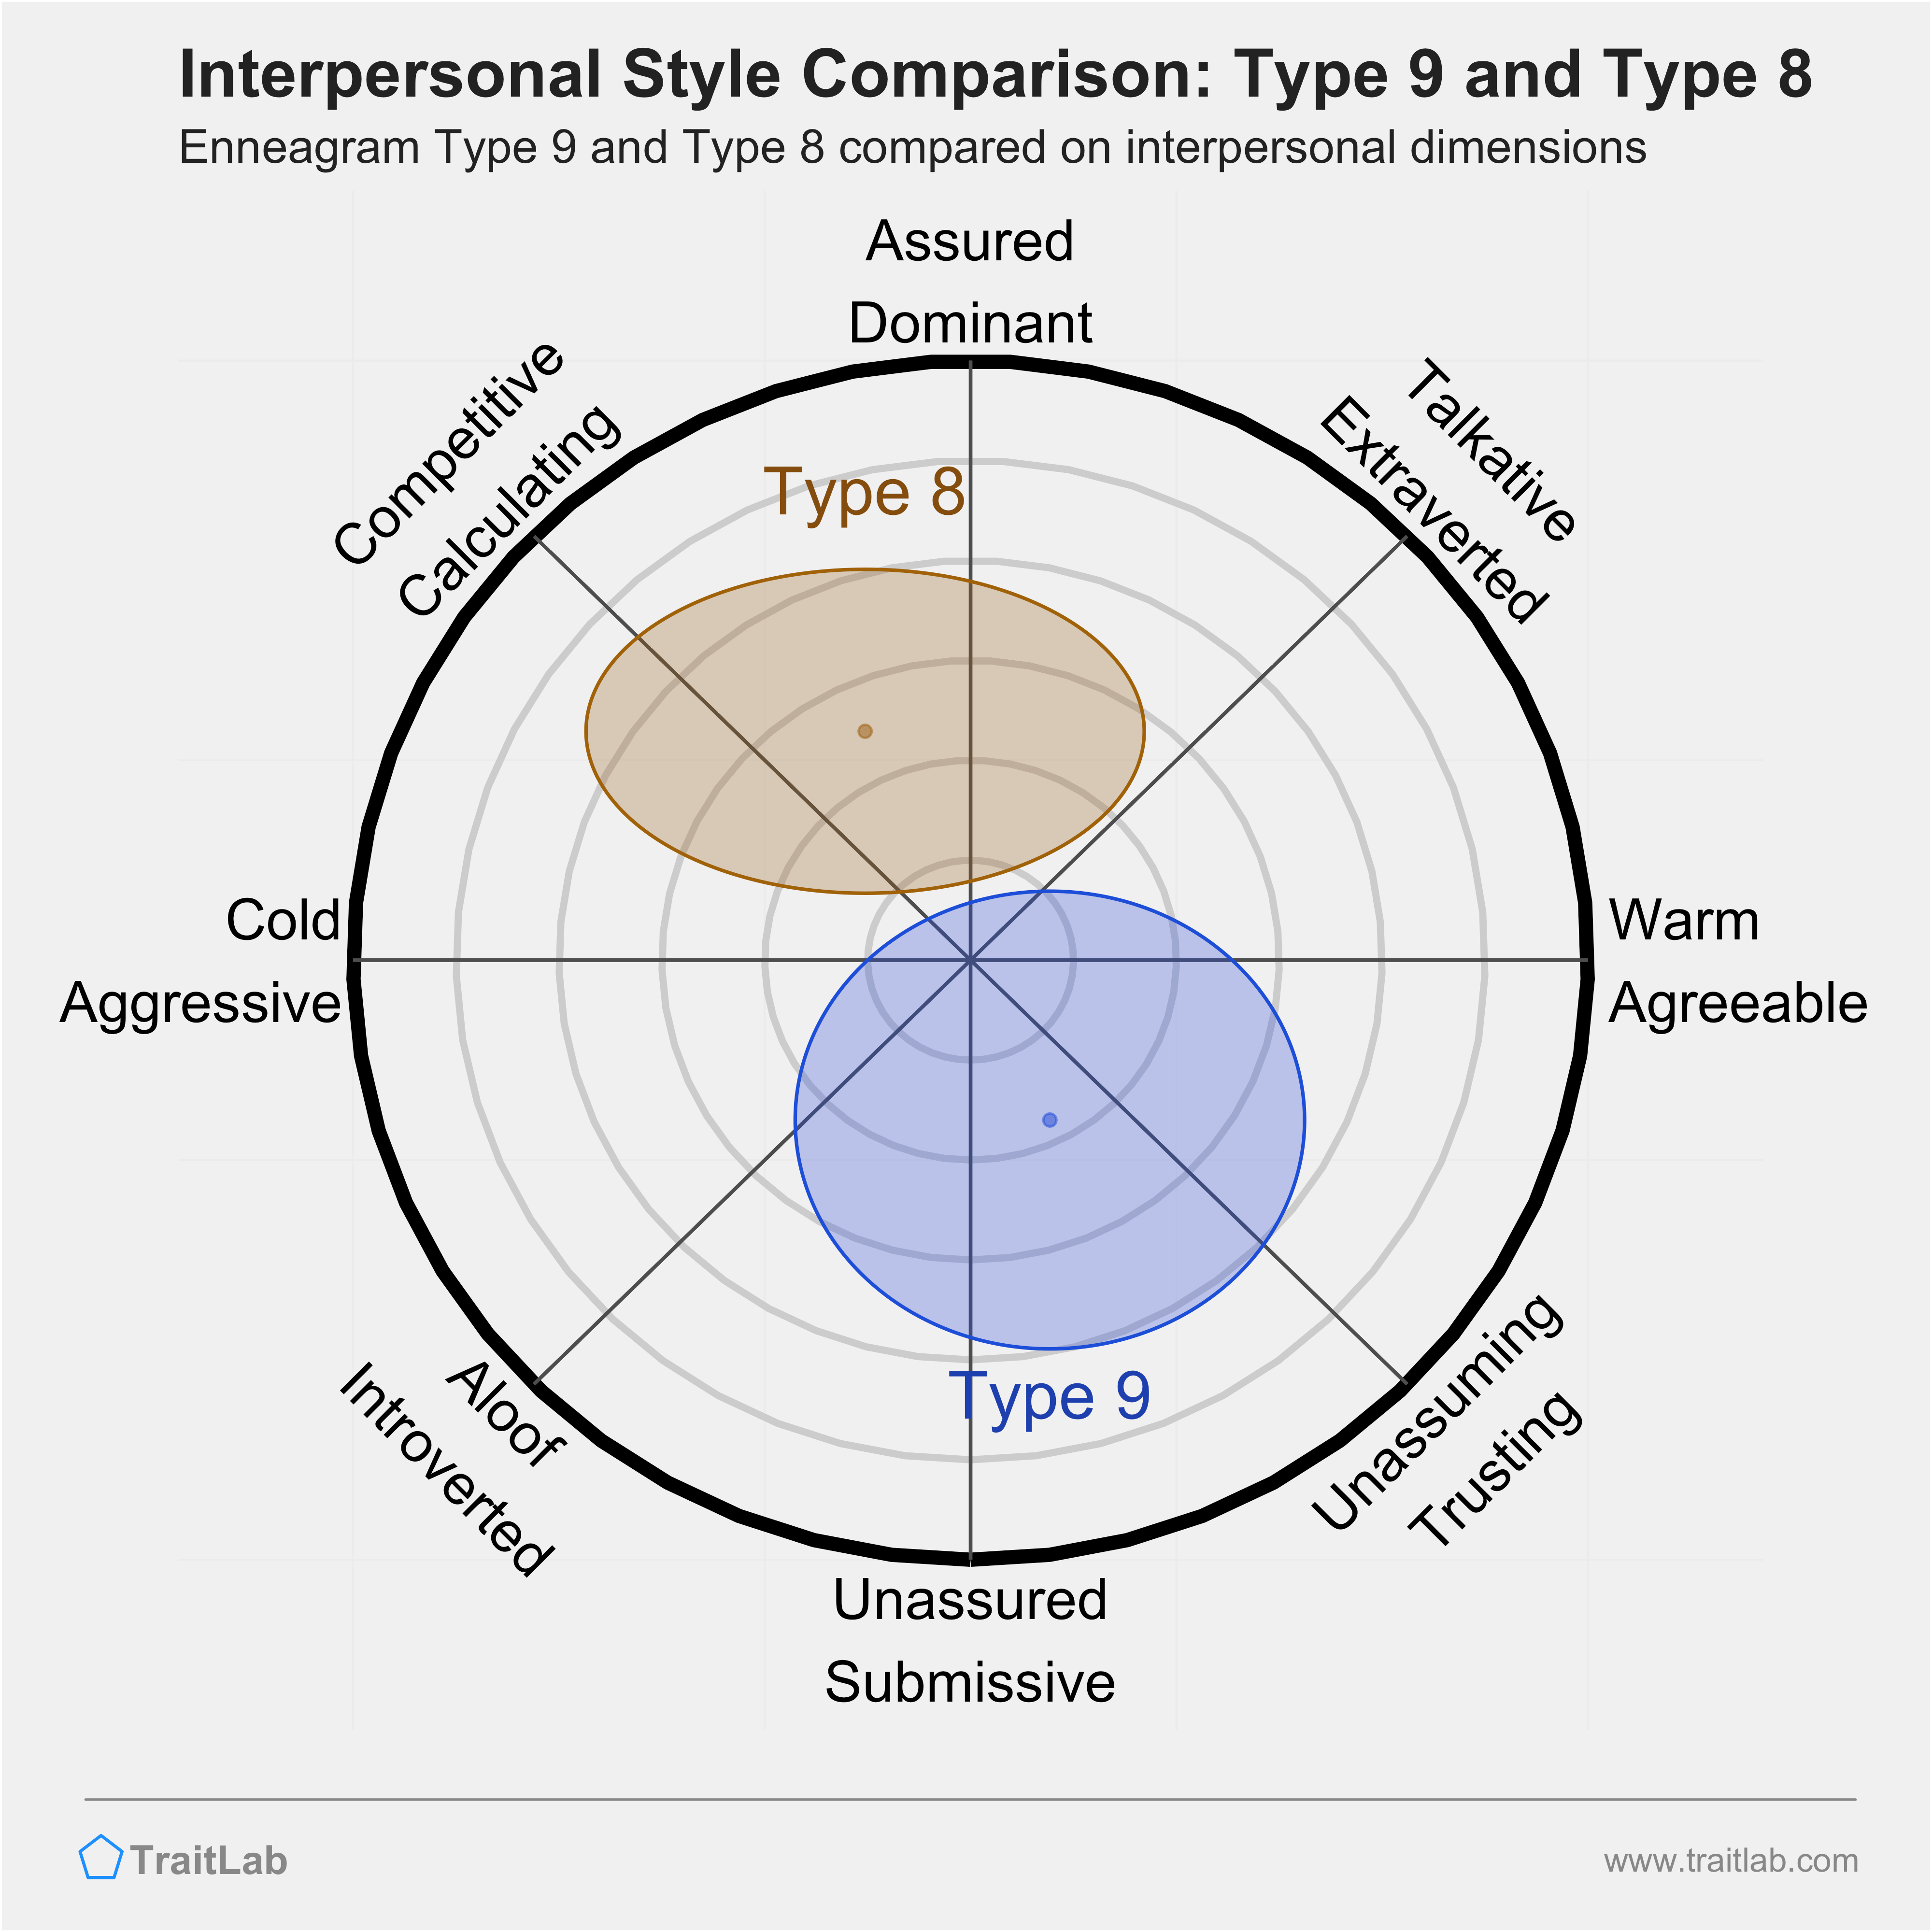 Enneagram Type 9 and Type 8 comparison across interpersonal dimensions